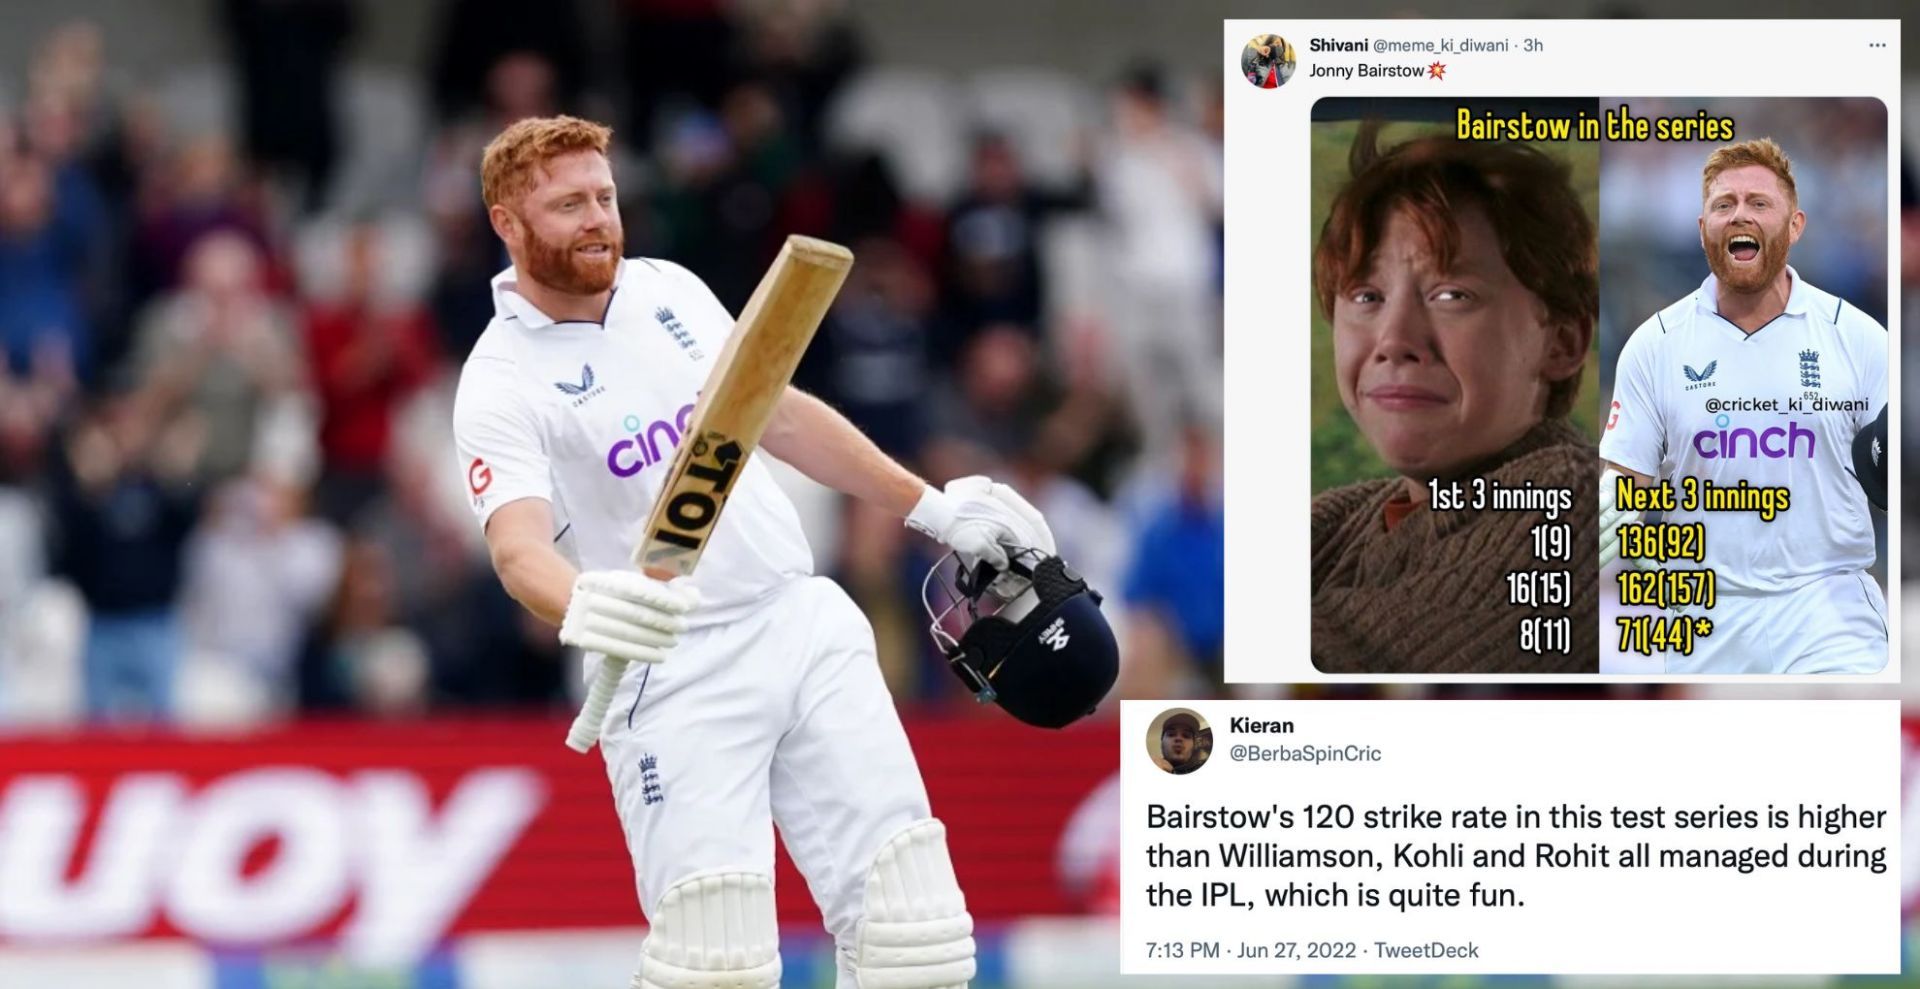 Jonny Bairstow remained unbeaten on 71 off just 44 balls in the third Test vs New Zealand.